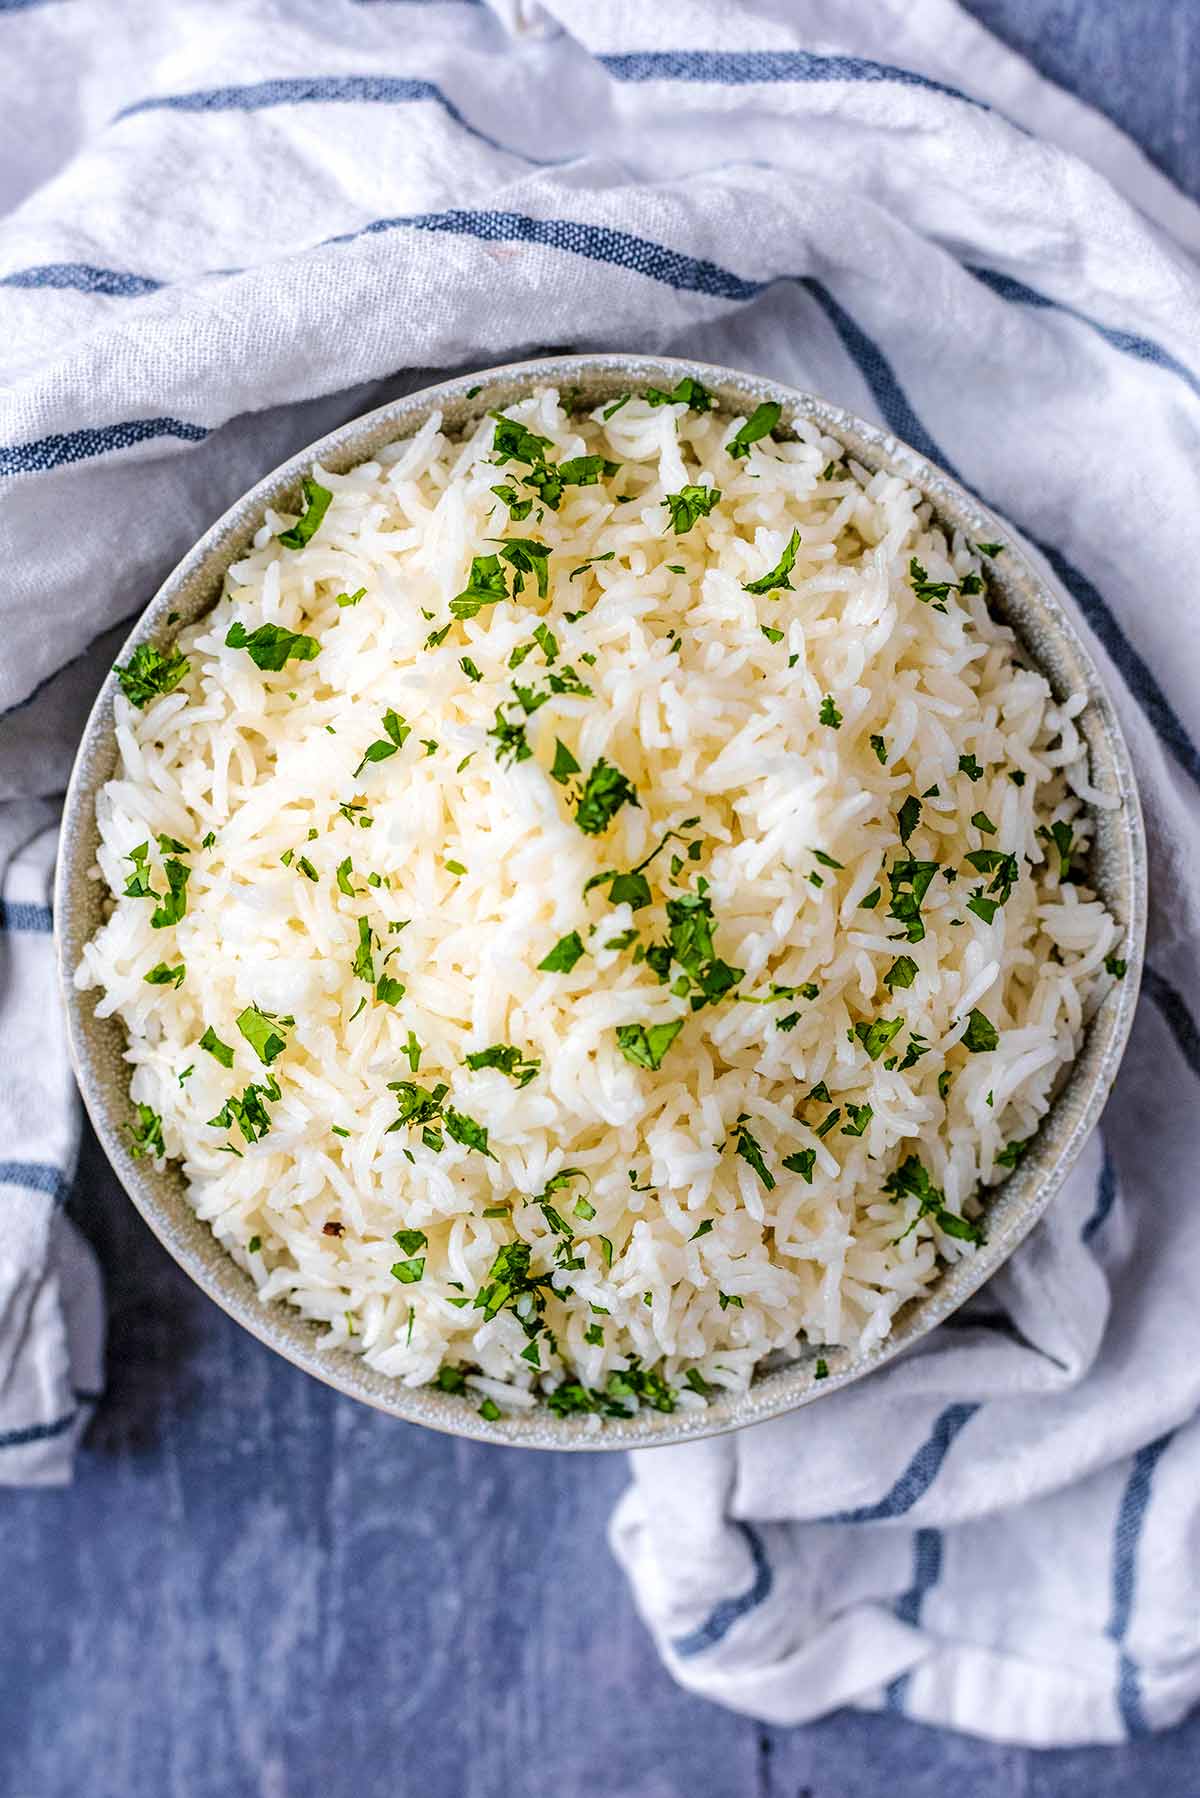 A bowl of cooked white rice with chopped herbs sprinkled over it.